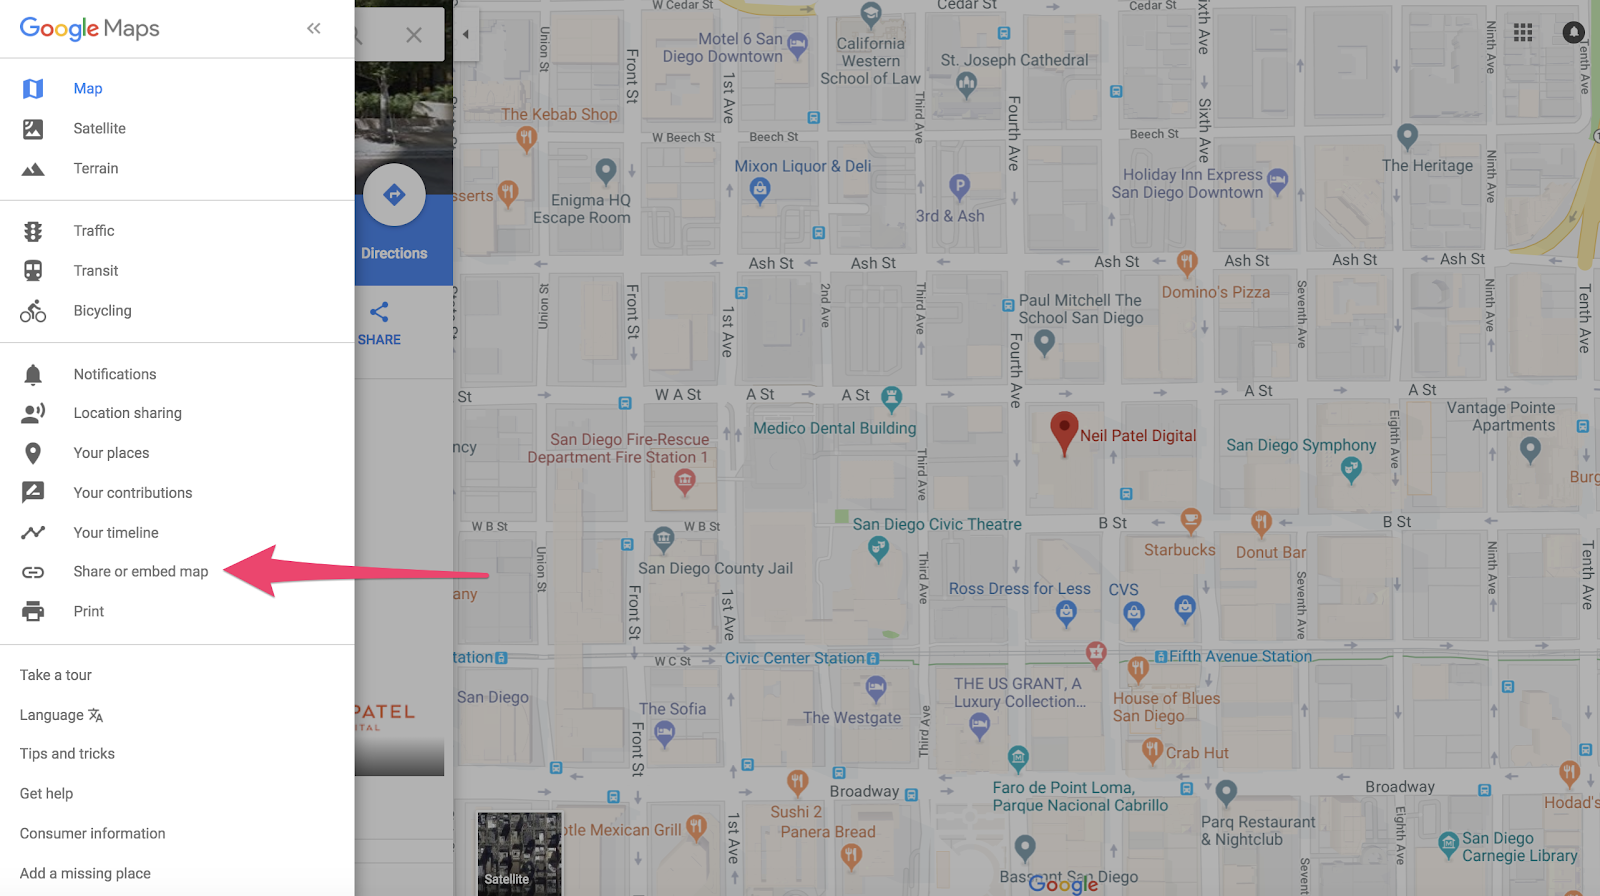 share/imbed map stage of claiming a business on Google